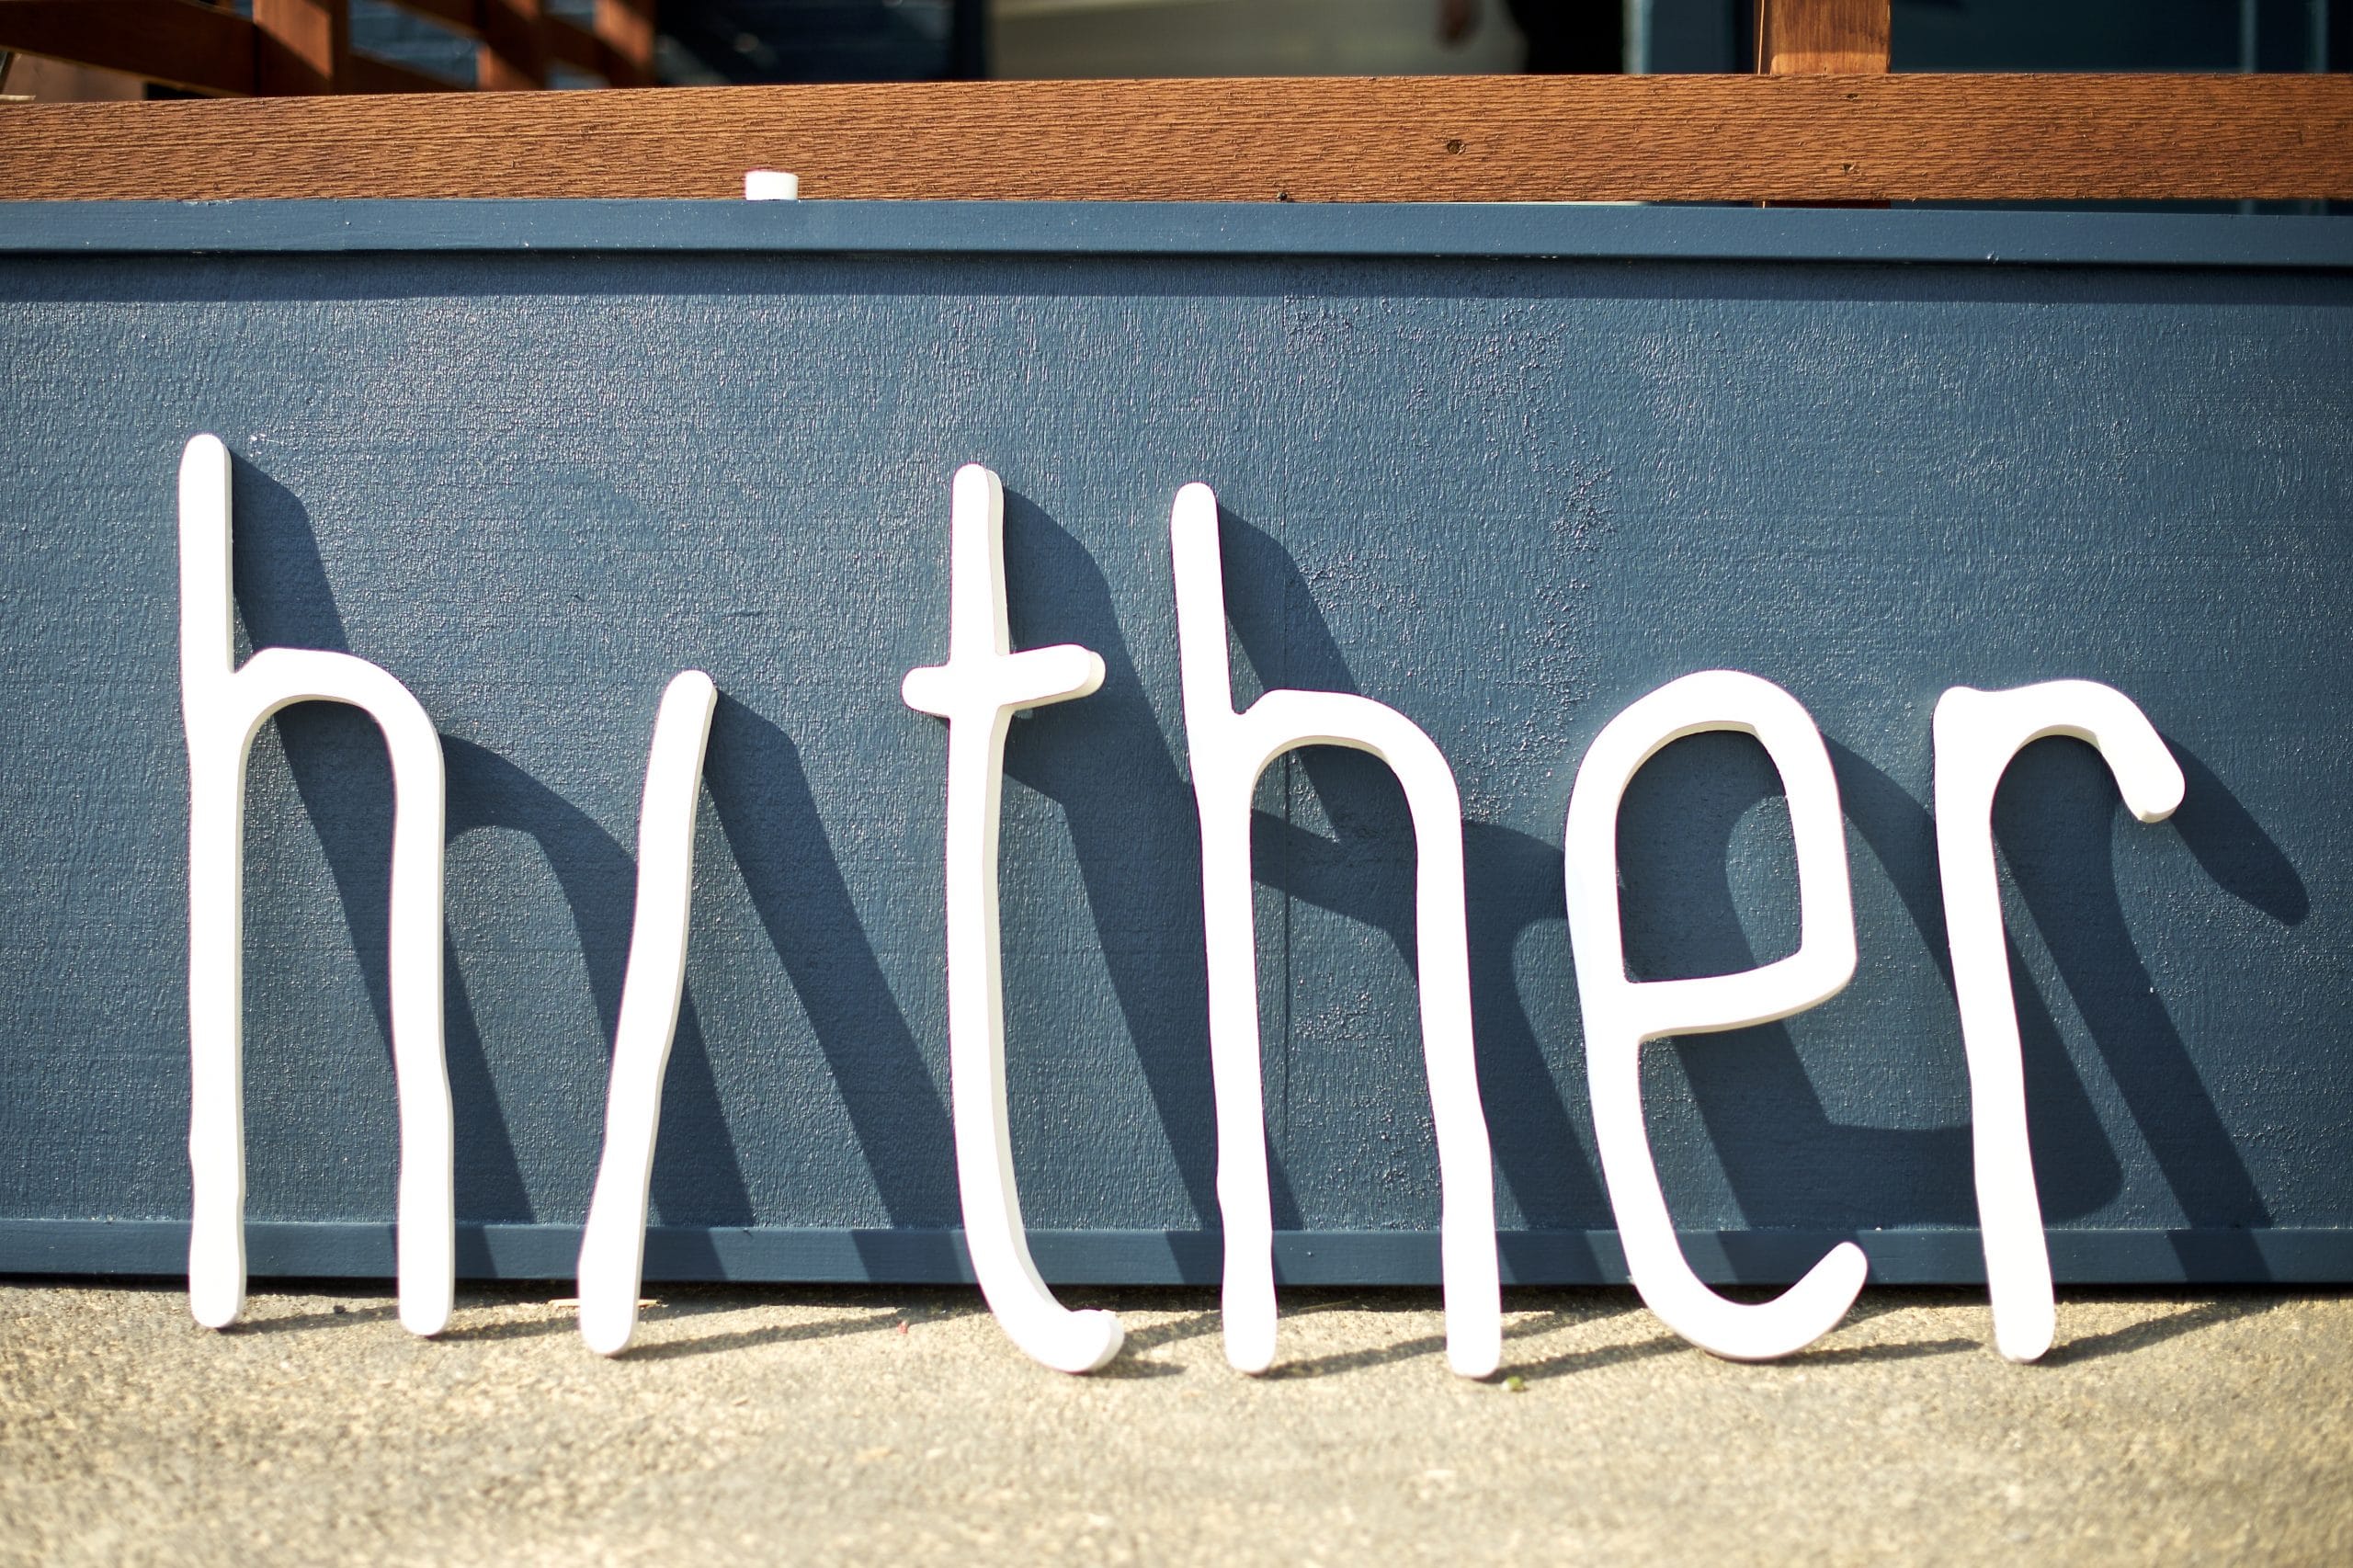 All the letters from the Hither Coffee + Goods sign leaning against a wall